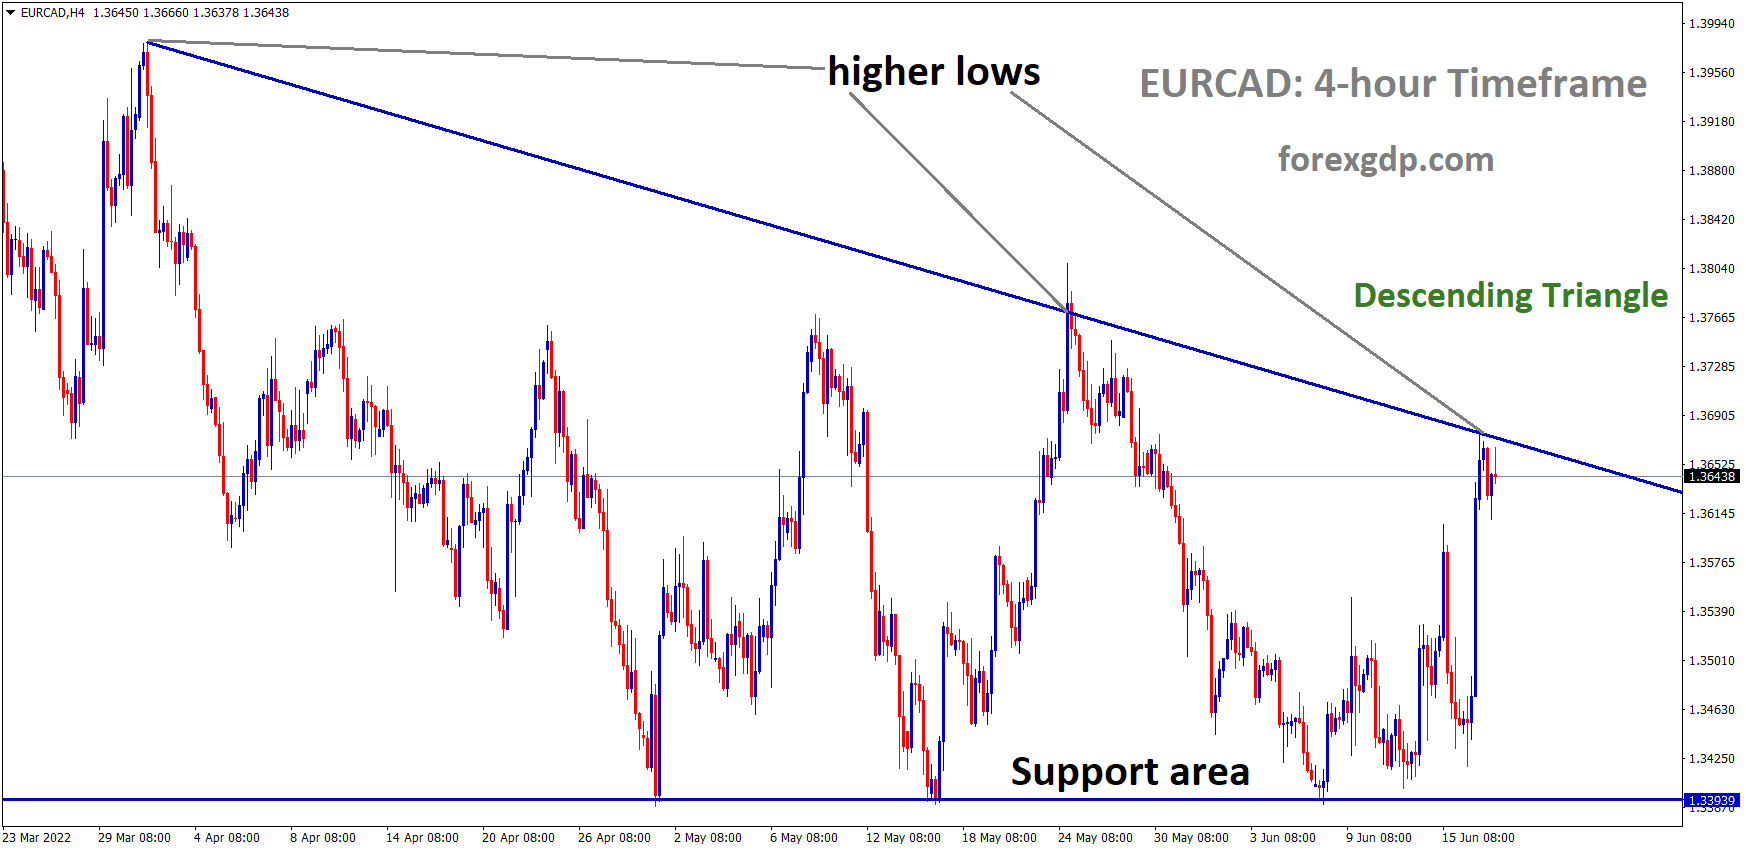 EURCAD is moving in the Descending triangle pattern and the market has reached the Lower high area of the pattern.